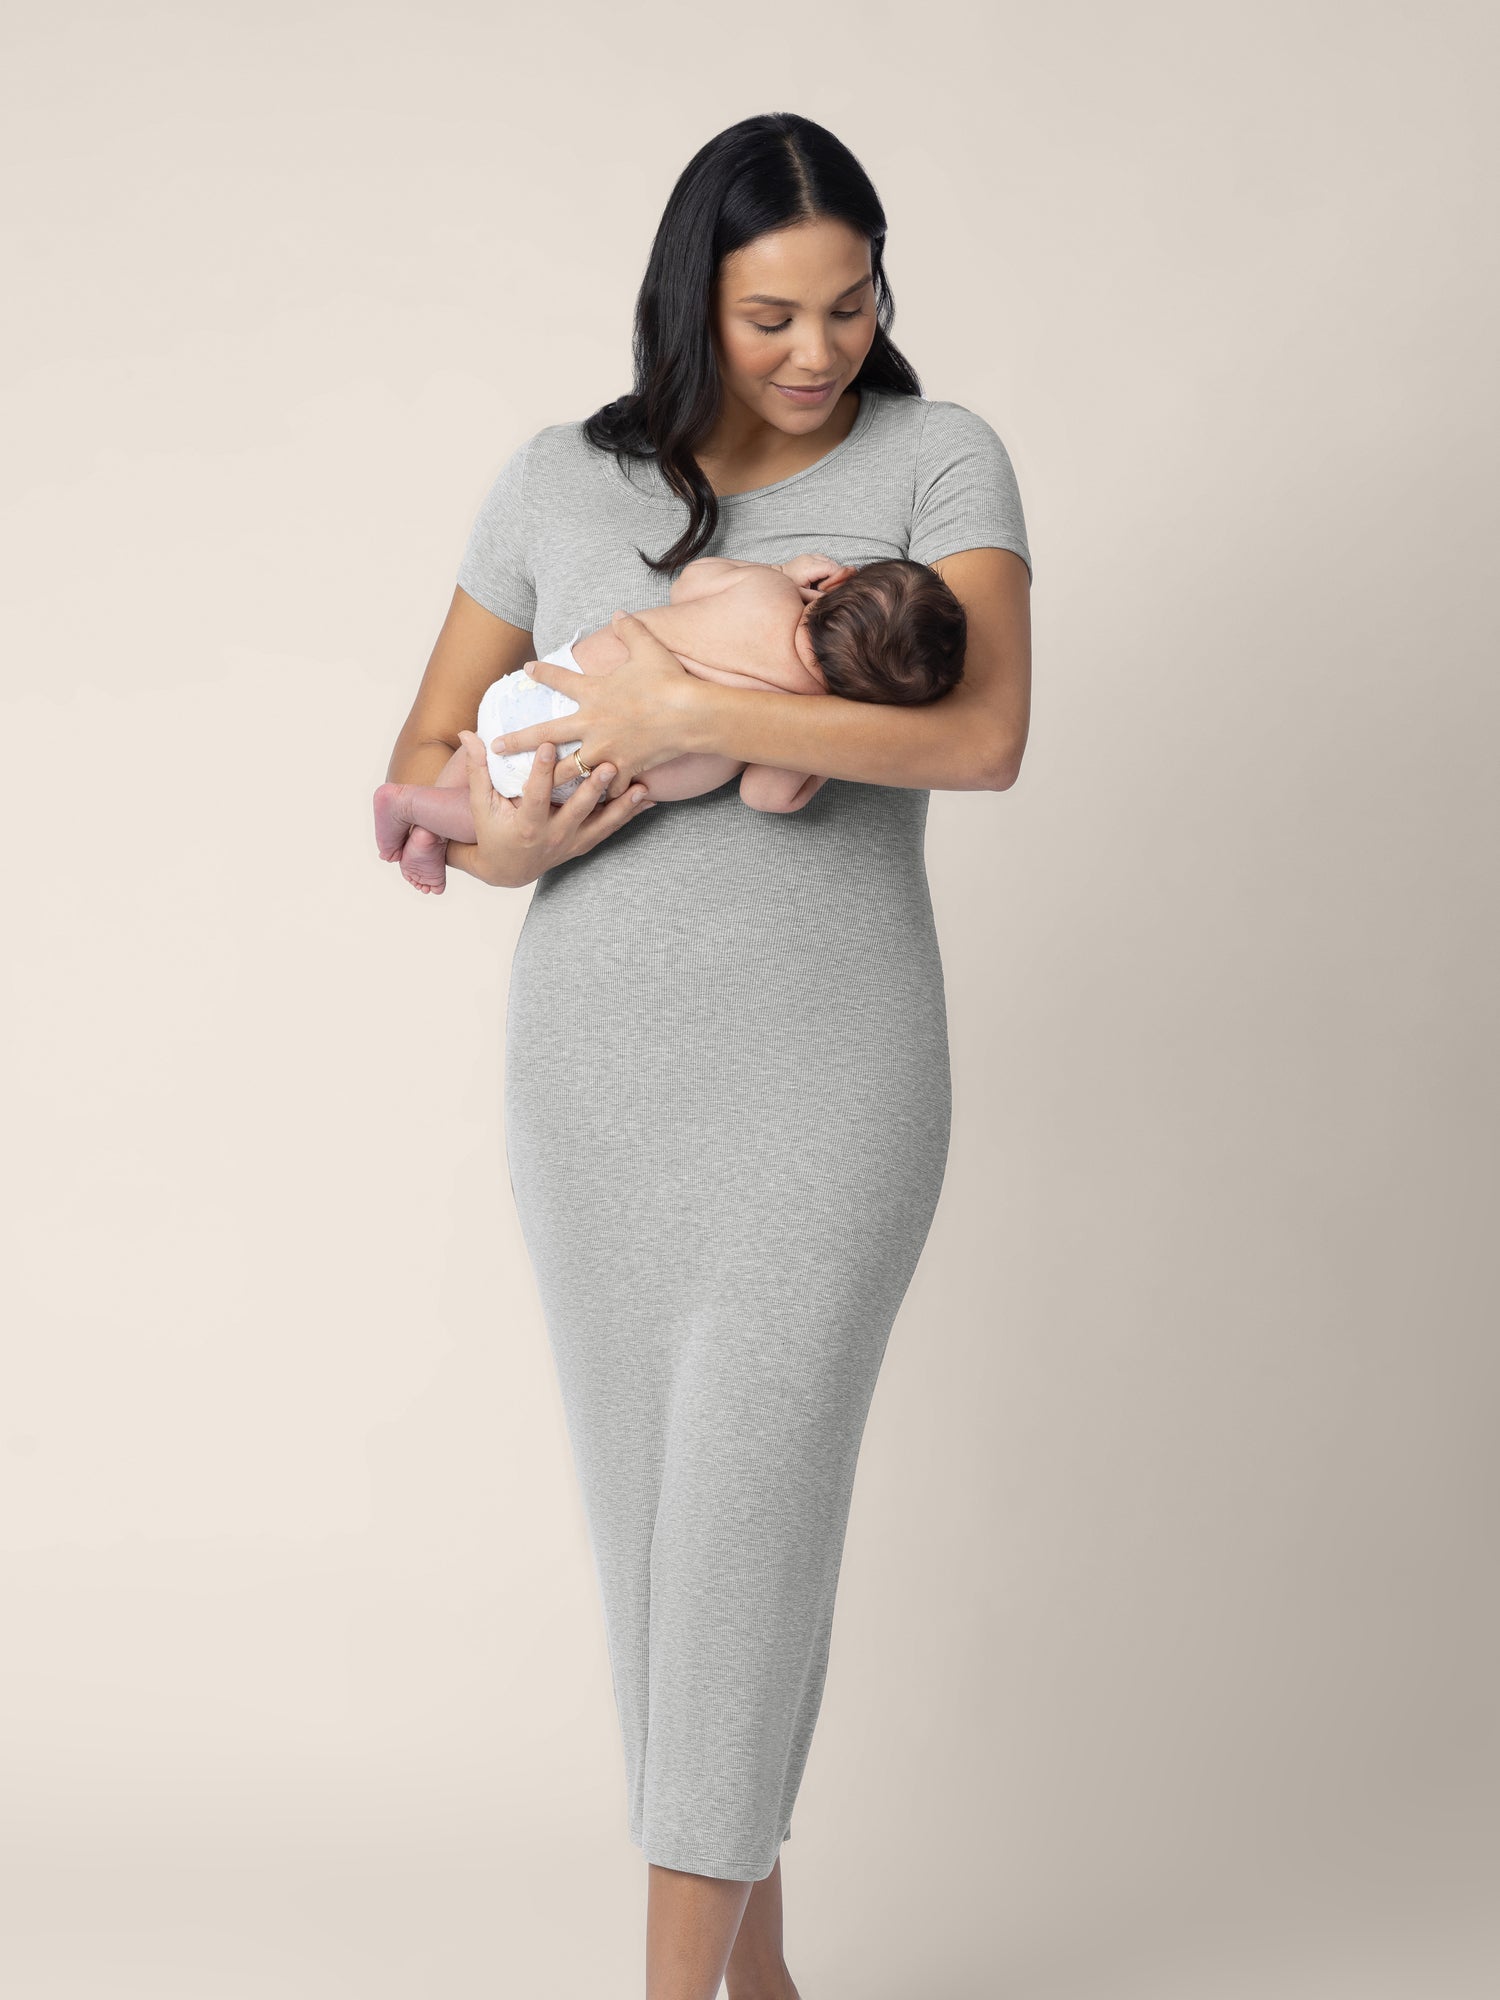 Breastfeeding model wearing the Olivia Ribbed Bamboo 2-in-1 Maternity & Nursing Dress in Grey Heather @model_info:Julana is 5'9" and wearing a Small.